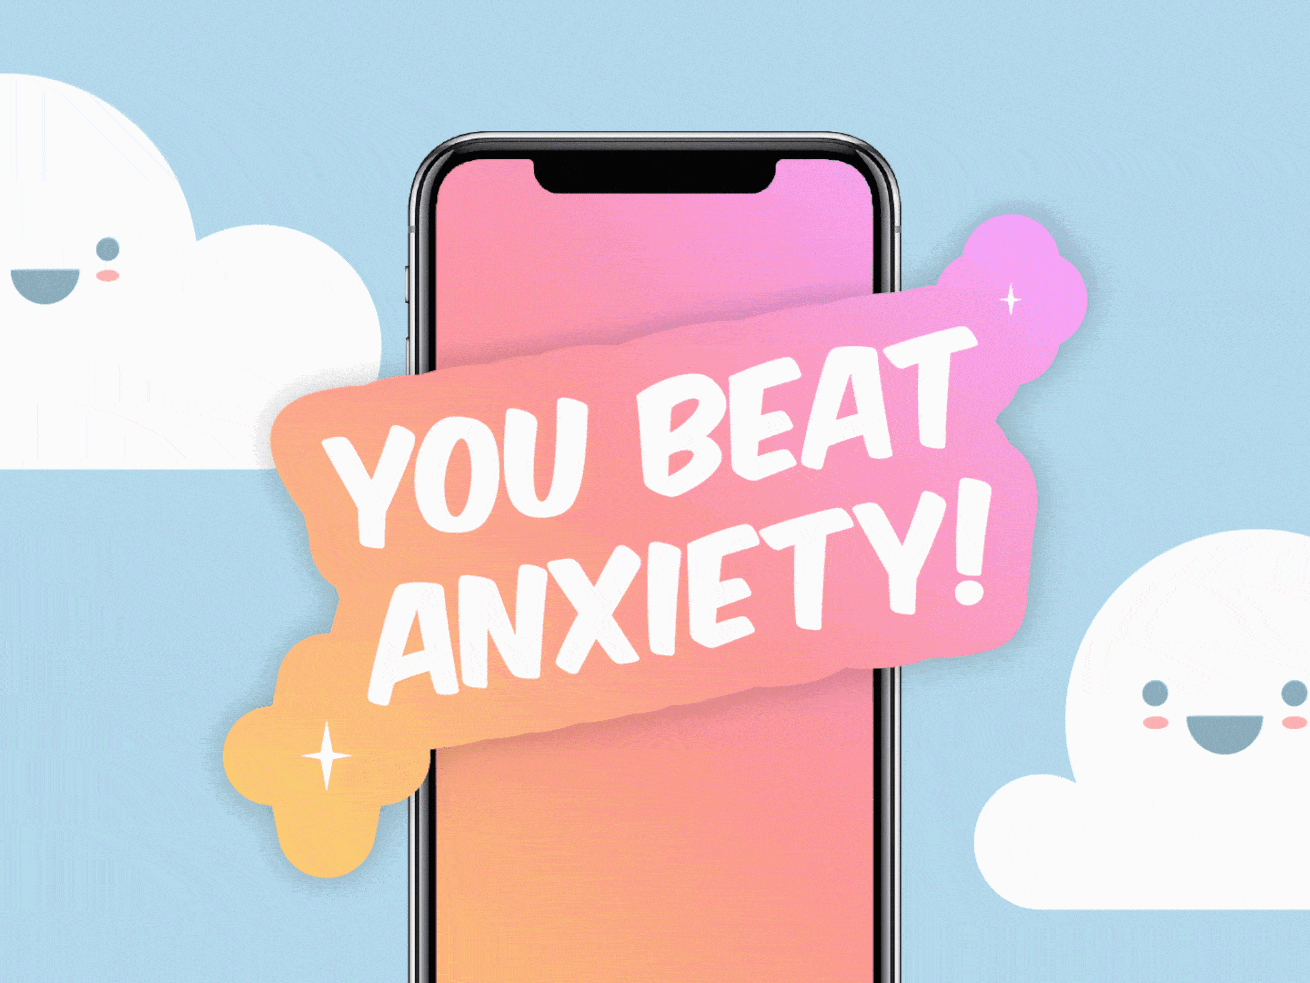 Can you lessen anxiety by playing a game on your phone?